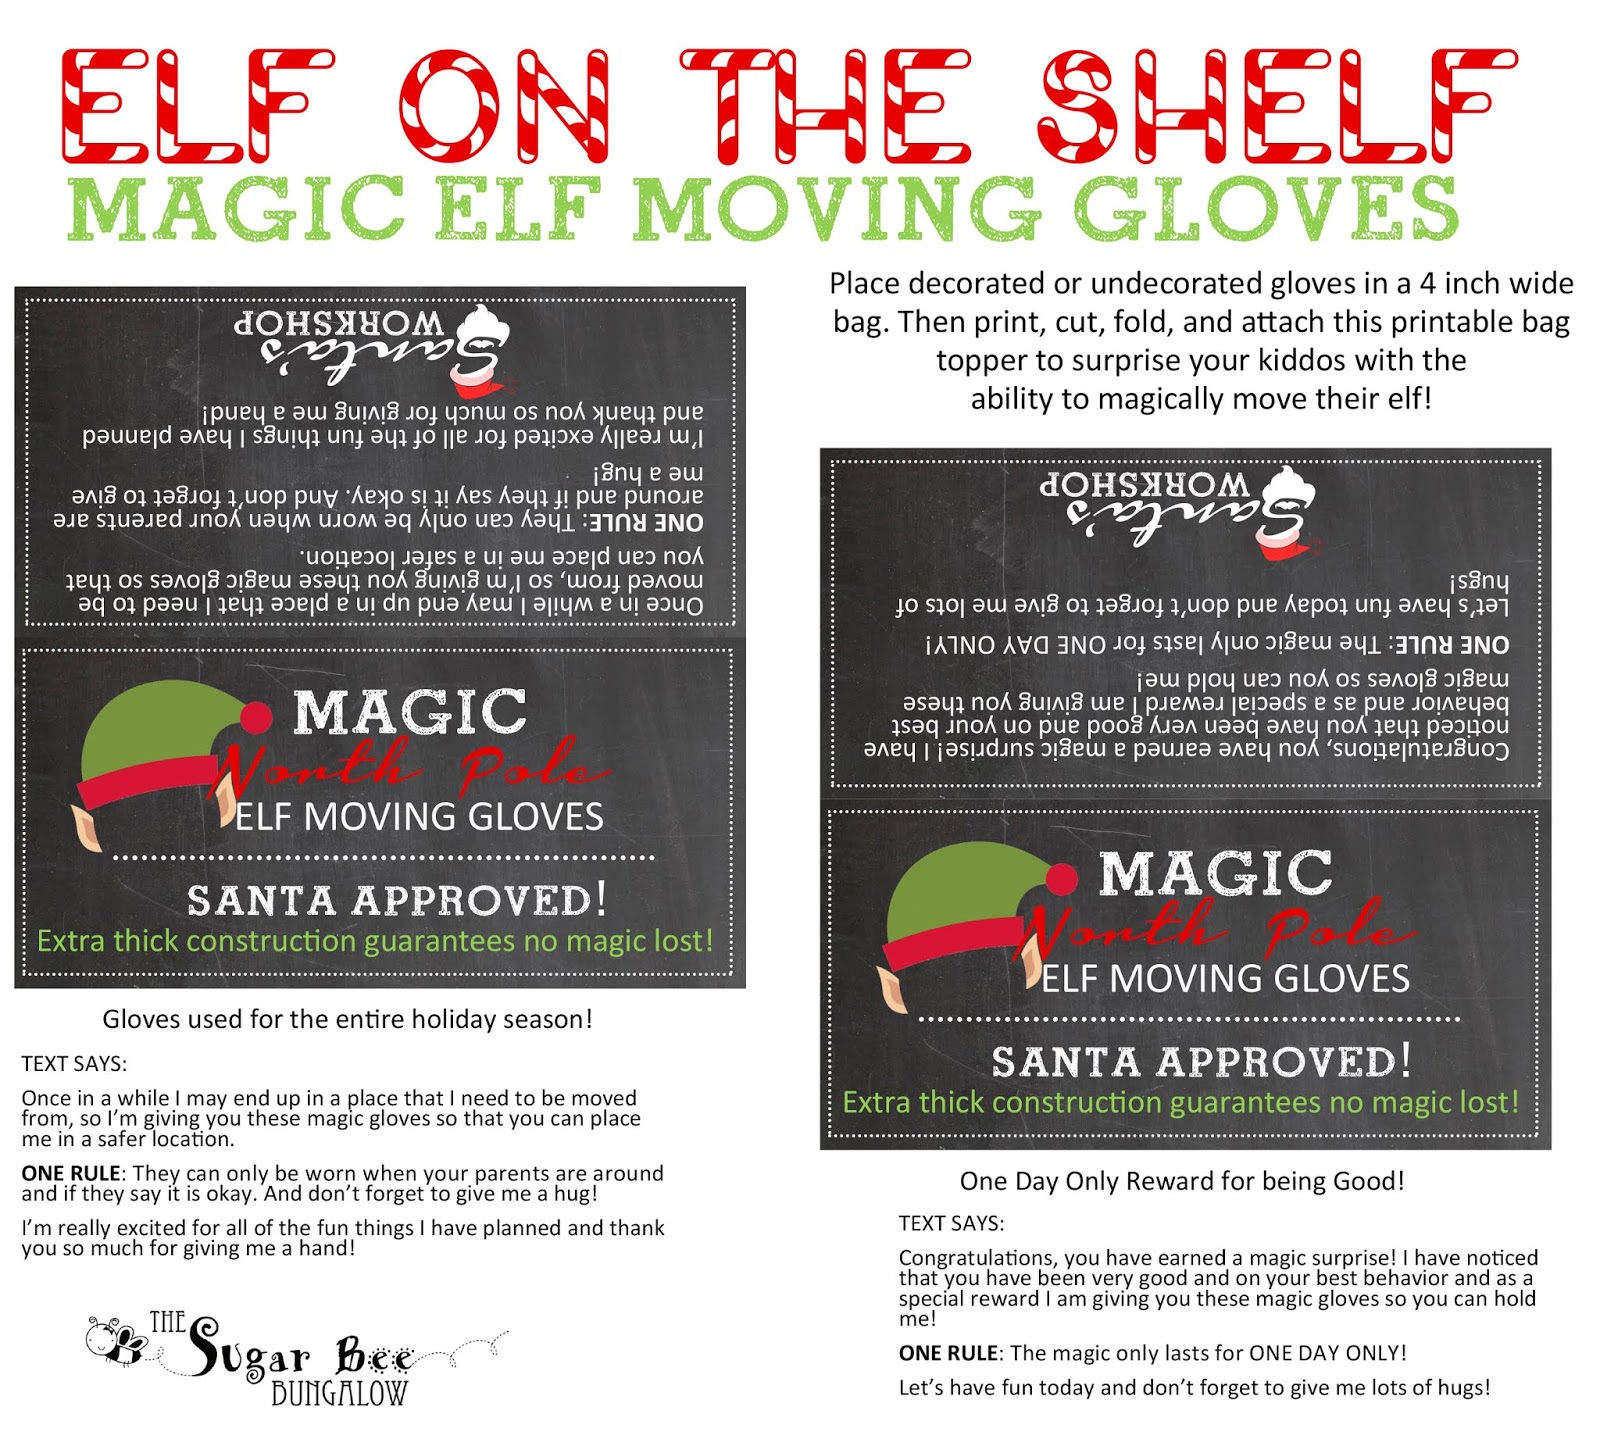 the-sugar-bee-bungalow-queen-bee-magic-elf-moving-gloves-printable